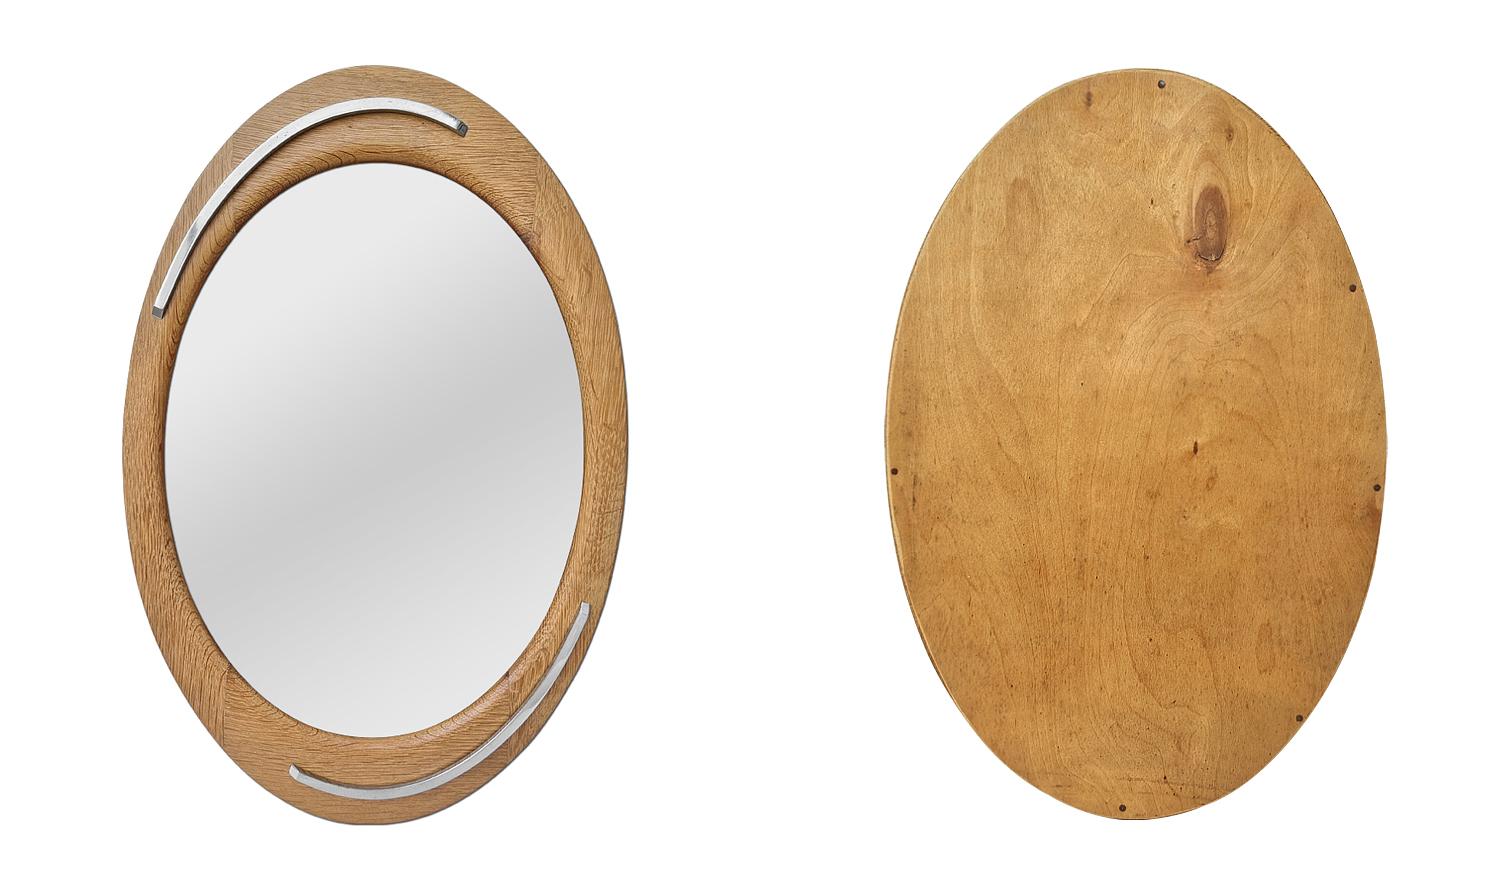 Antique French Oval Design Mirror, Oak Wood & Stainless Steel, circa 1960 For Sale 2